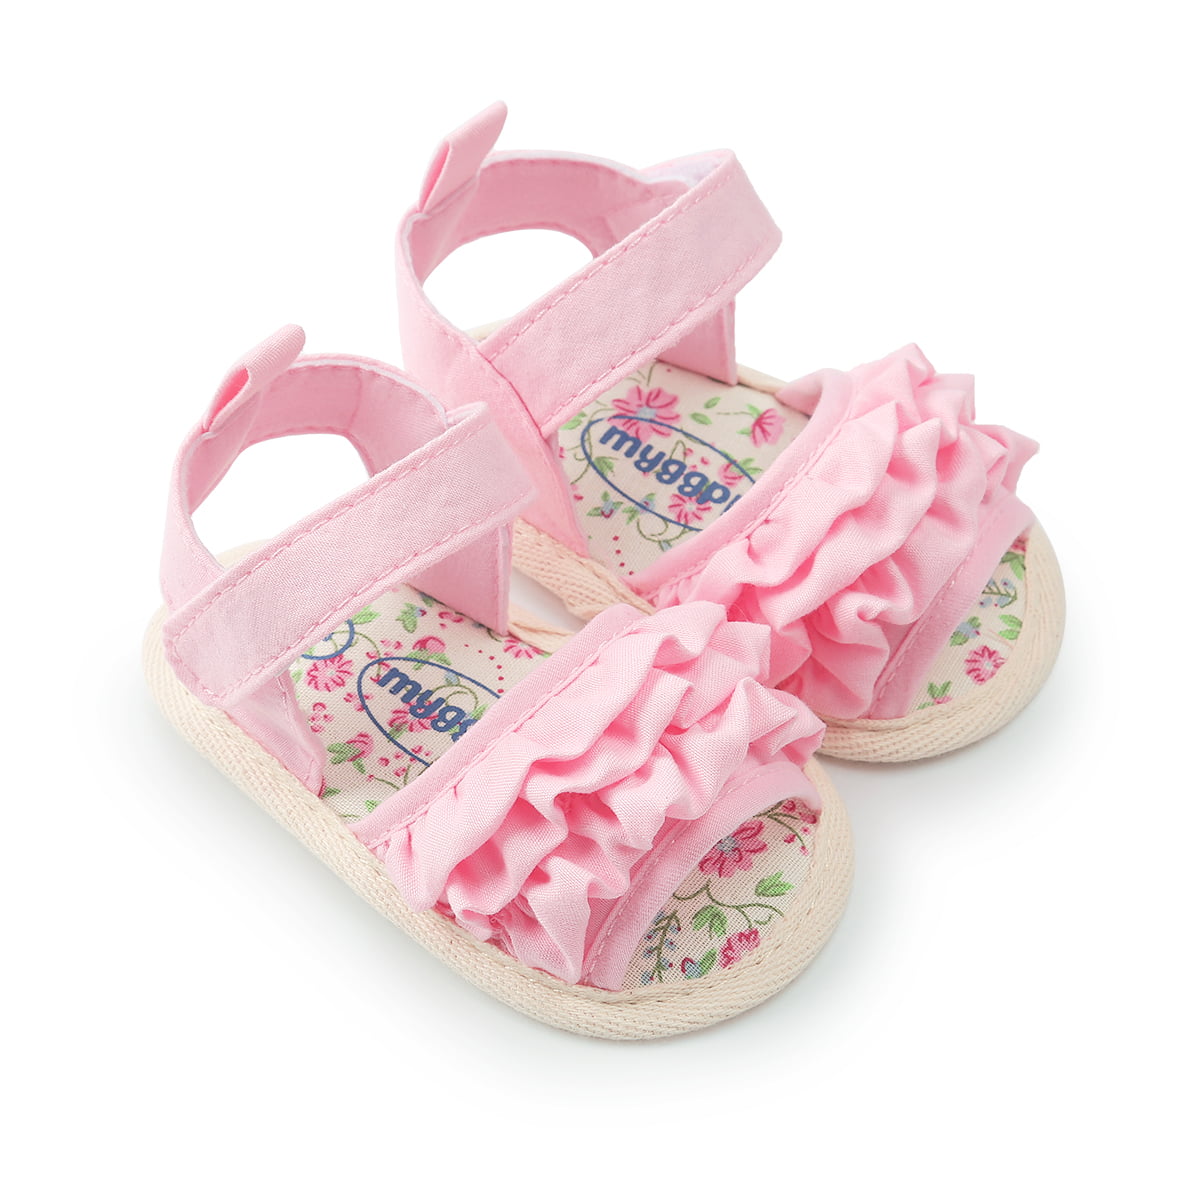 Baby Flower Sandals Toddler Princess First Walkers Girls Kid Shoes SHOBDW Girls Shoes 